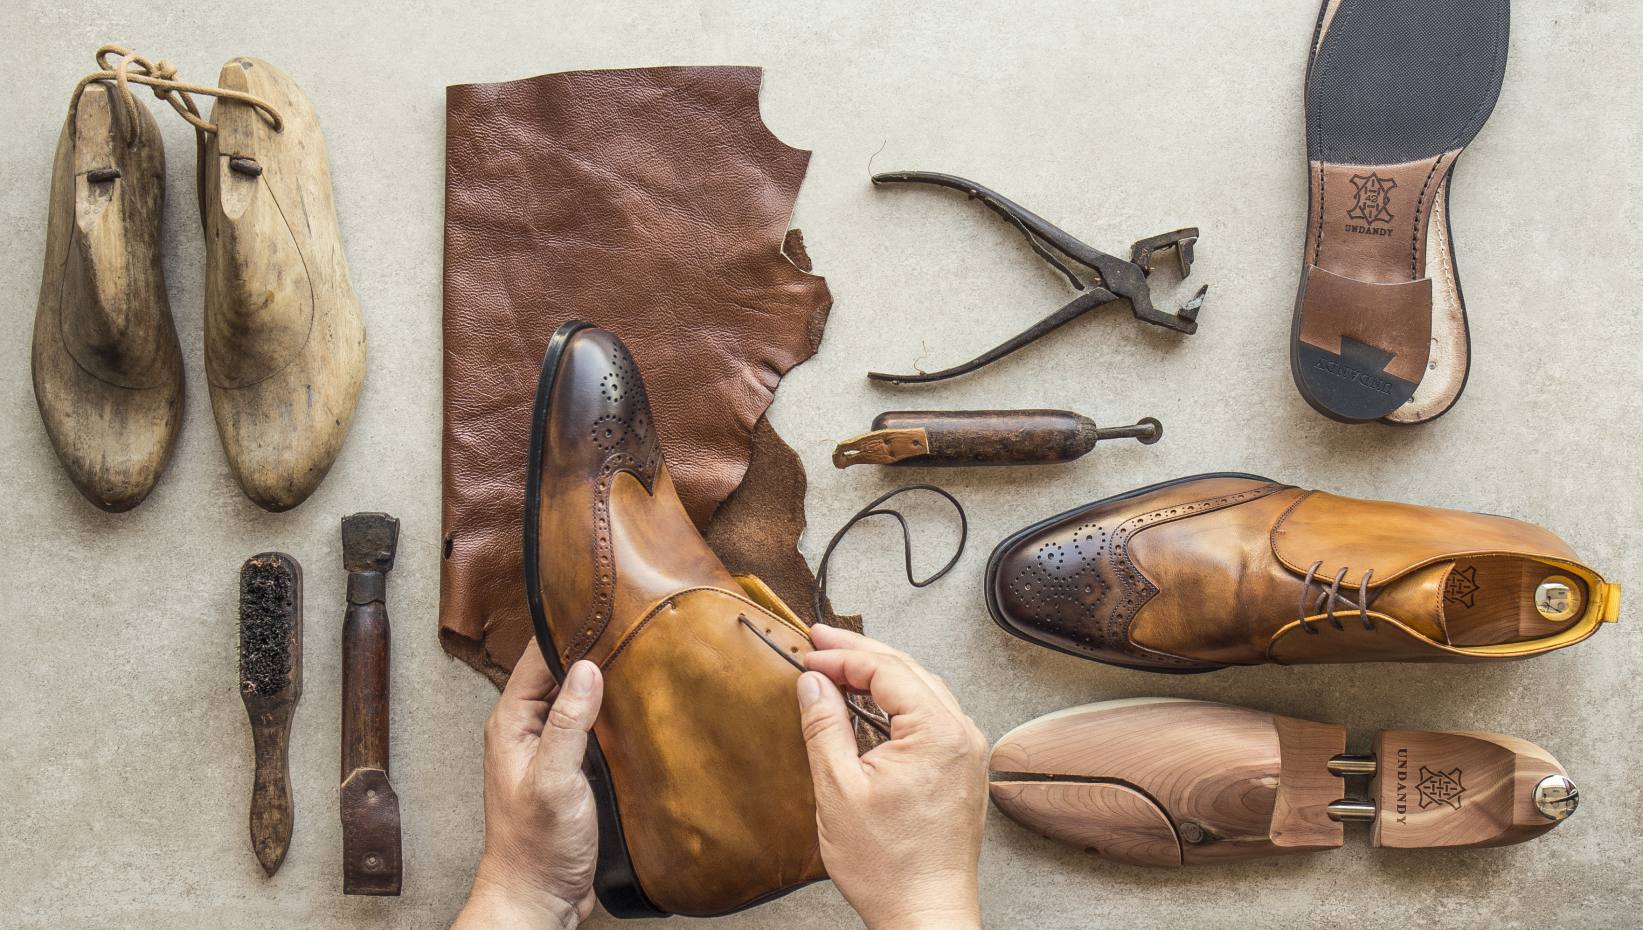 Portugal's footwear industry makes Top 20 world producers list